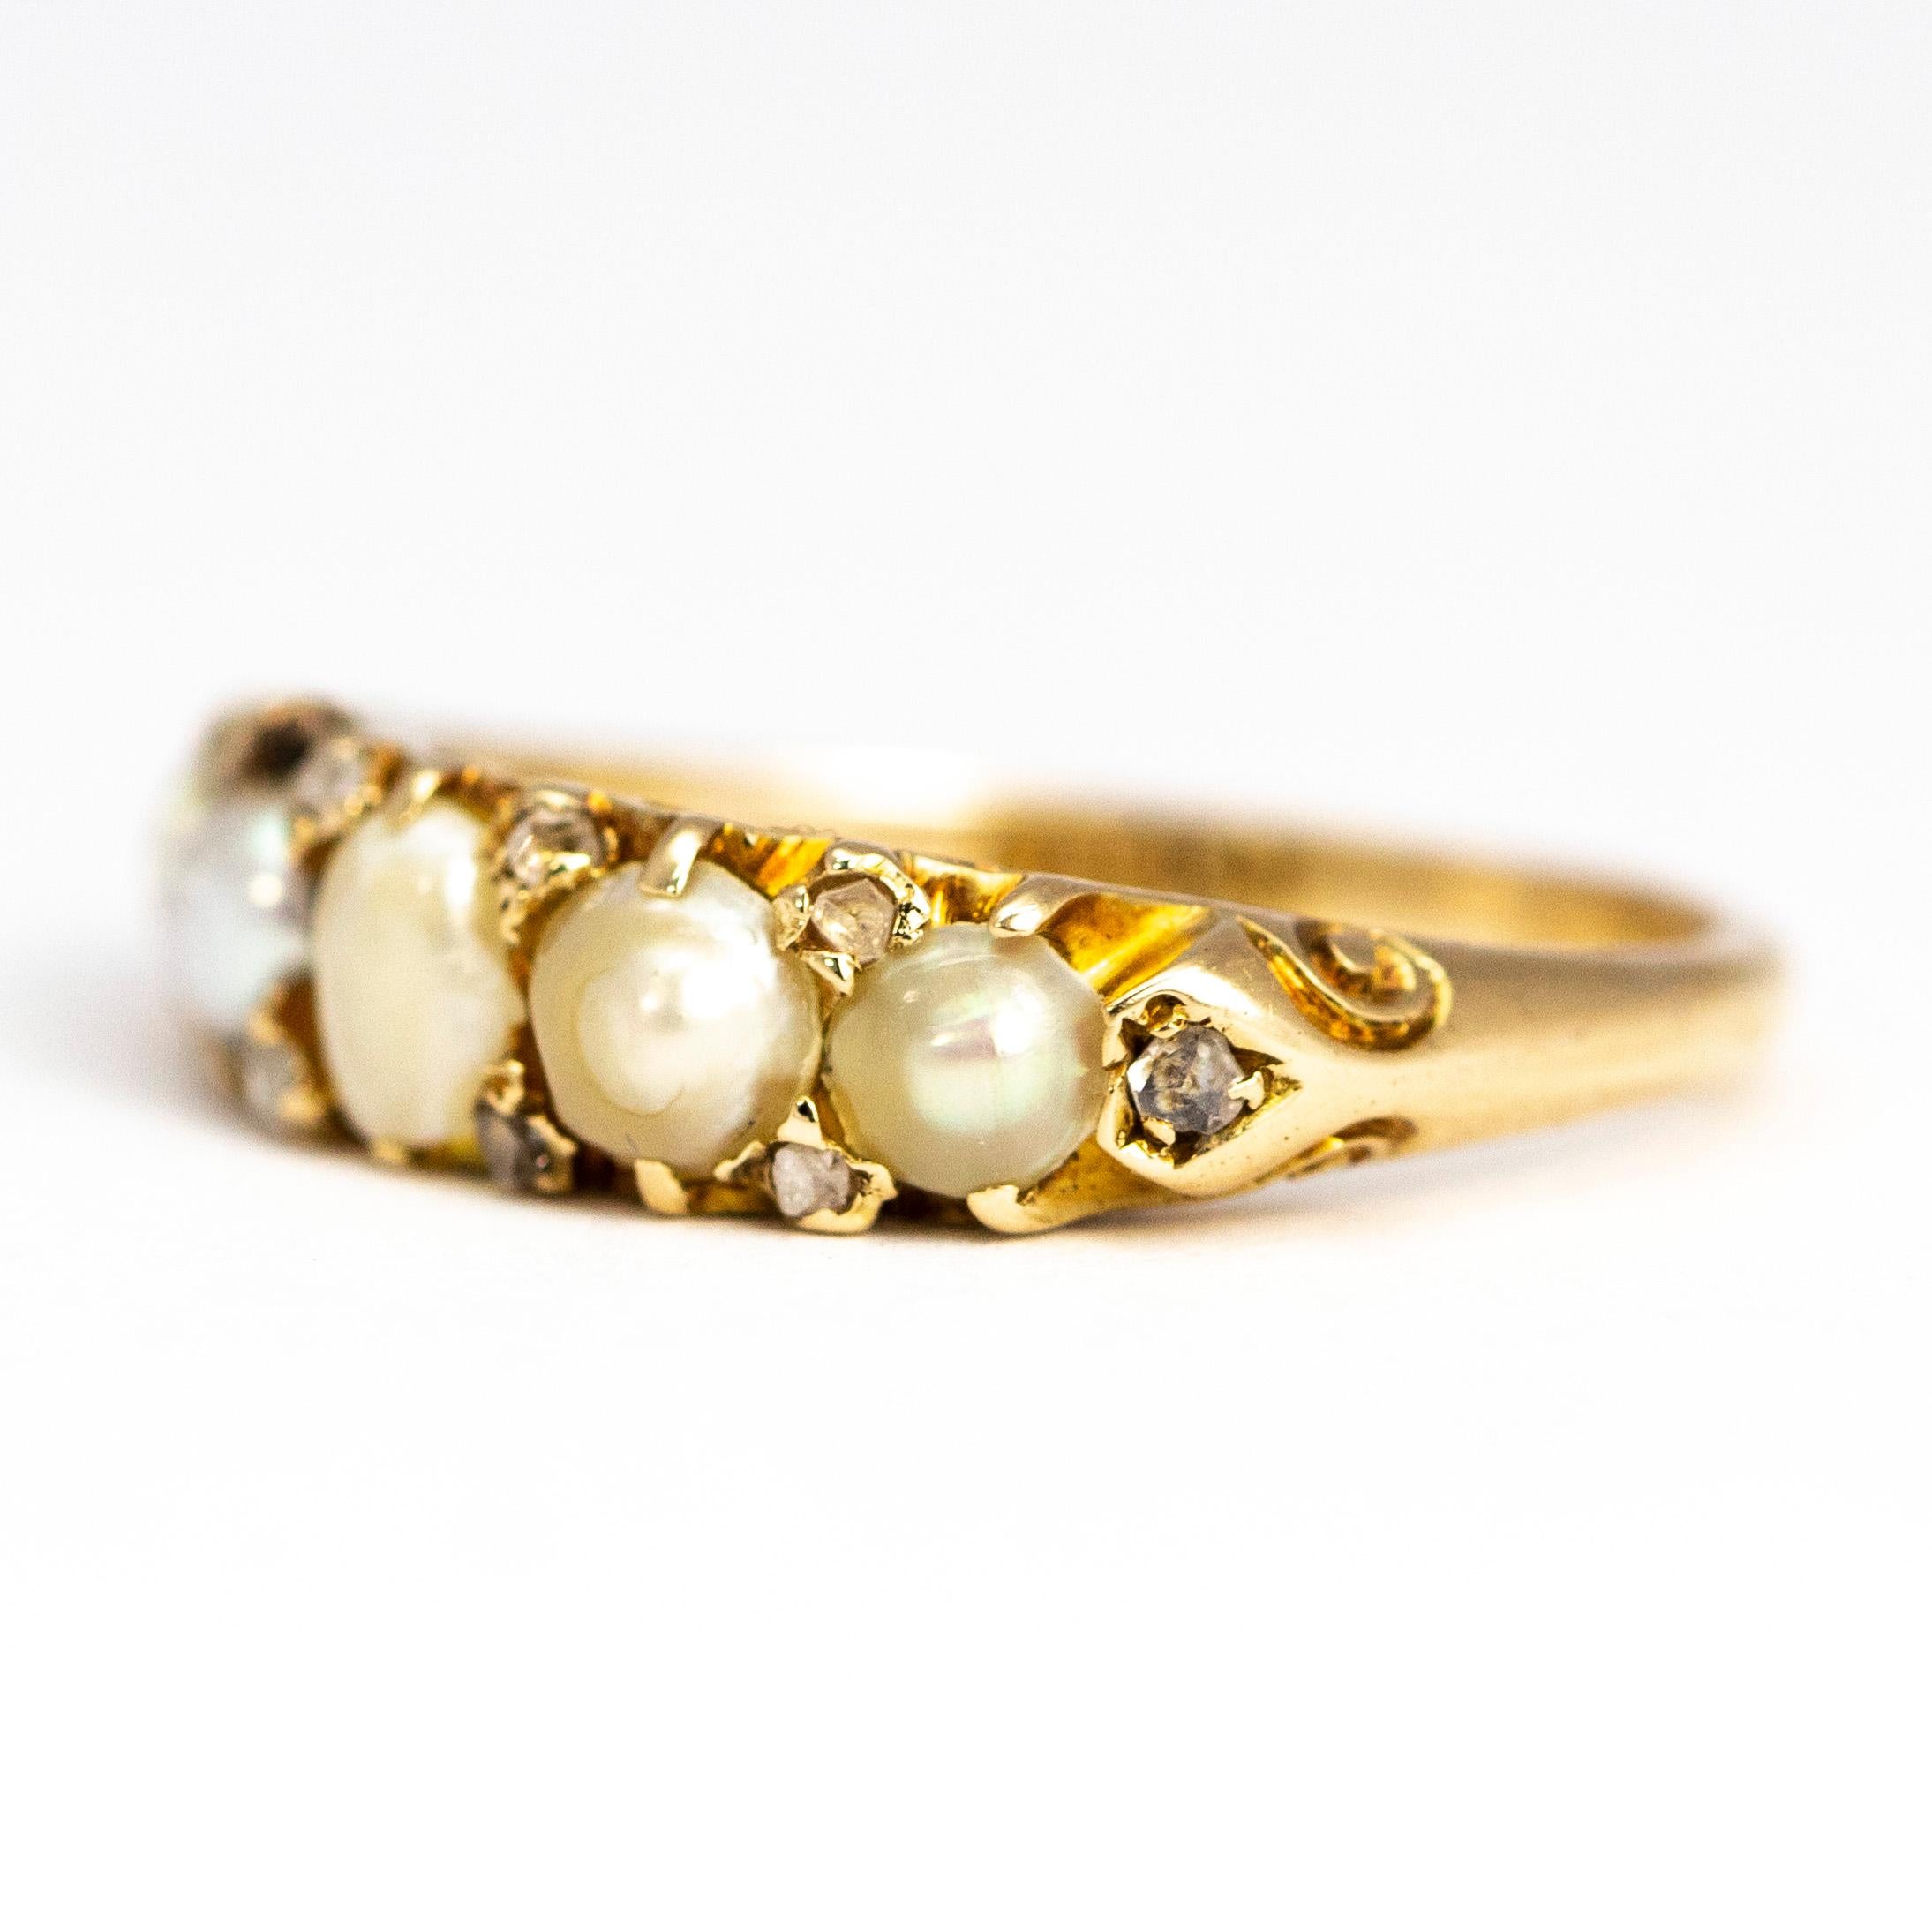 This sweet ring holds a total of five graduated pearls which each have two diamond points in-between them. At either end of the five pearls sits a single rose cut diamond which lead down onto the ornate scroll shoulders. 

Ring Size: L or 5 3/4
Band